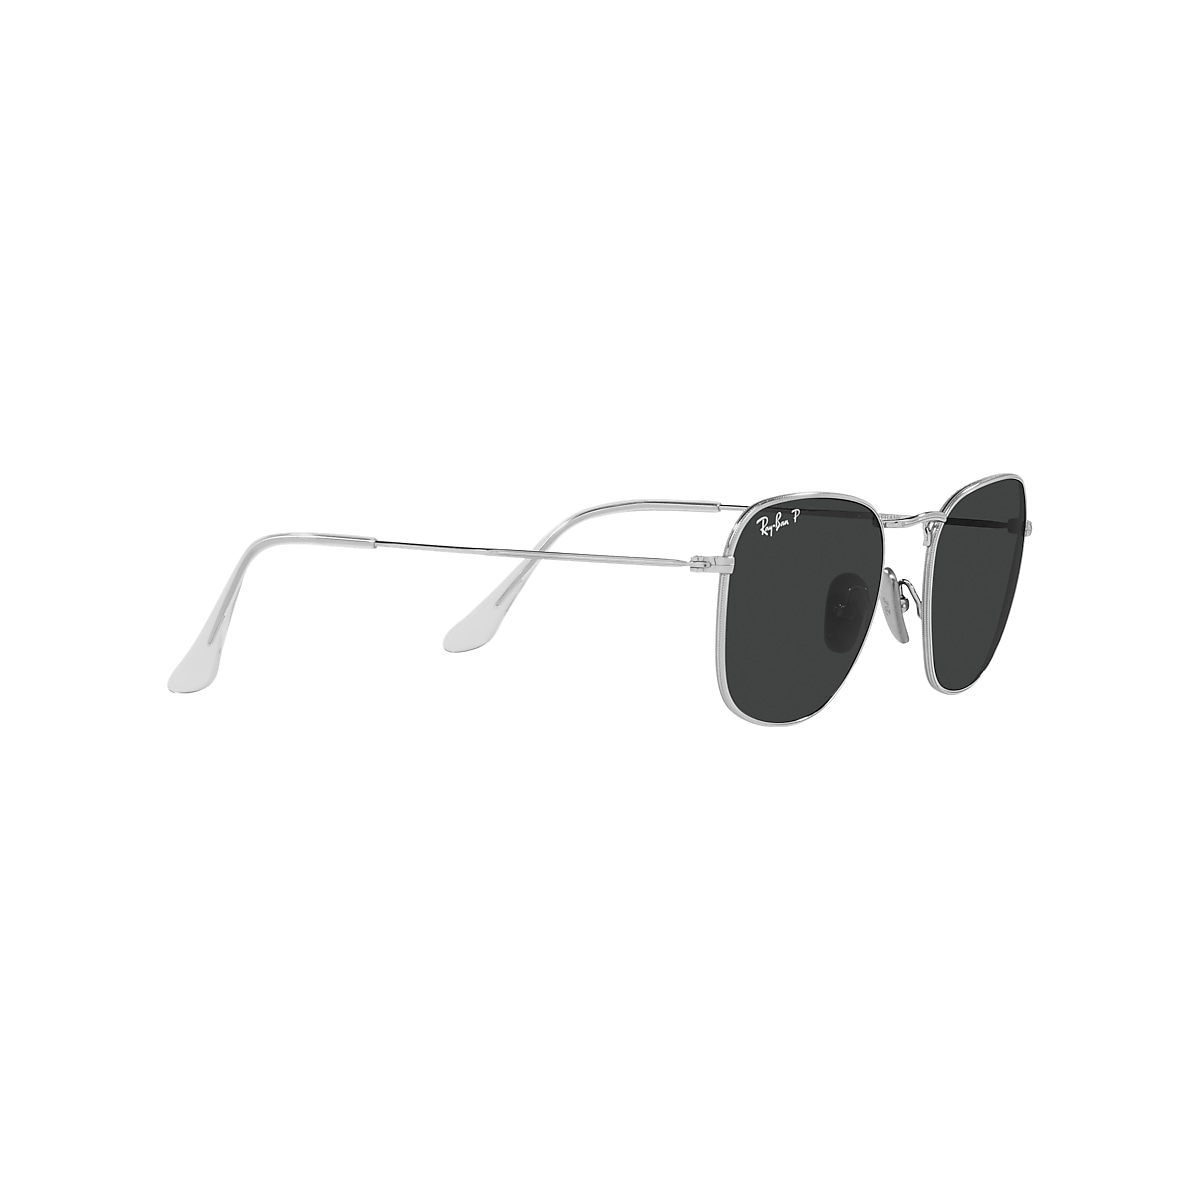 FRANK TITANIUM Sunglasses in Silver and Black - RB8157 | Ray-Ban® US